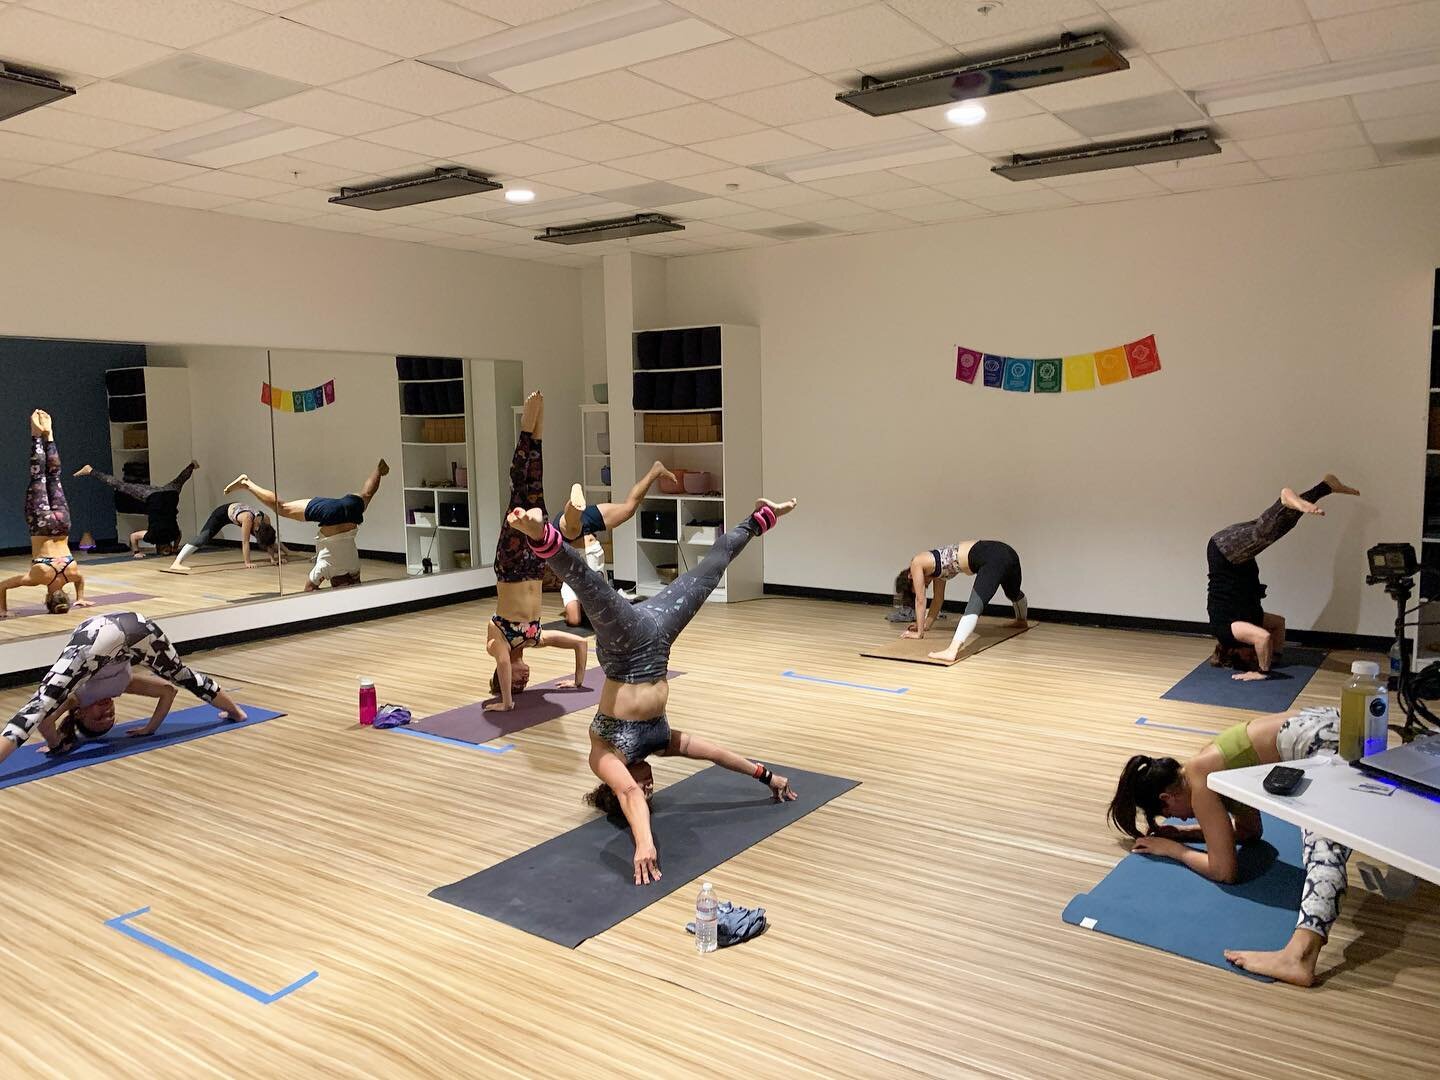 The new normal 🥰🥰🥰 and we&rsquo;re loving every minute of it!!!!

We hope you&rsquo;re enjoying our indoor classes as much as we are and we hope you&rsquo;re enjoying the fact that now our available schedule doubled!! Almost all our classes are bo